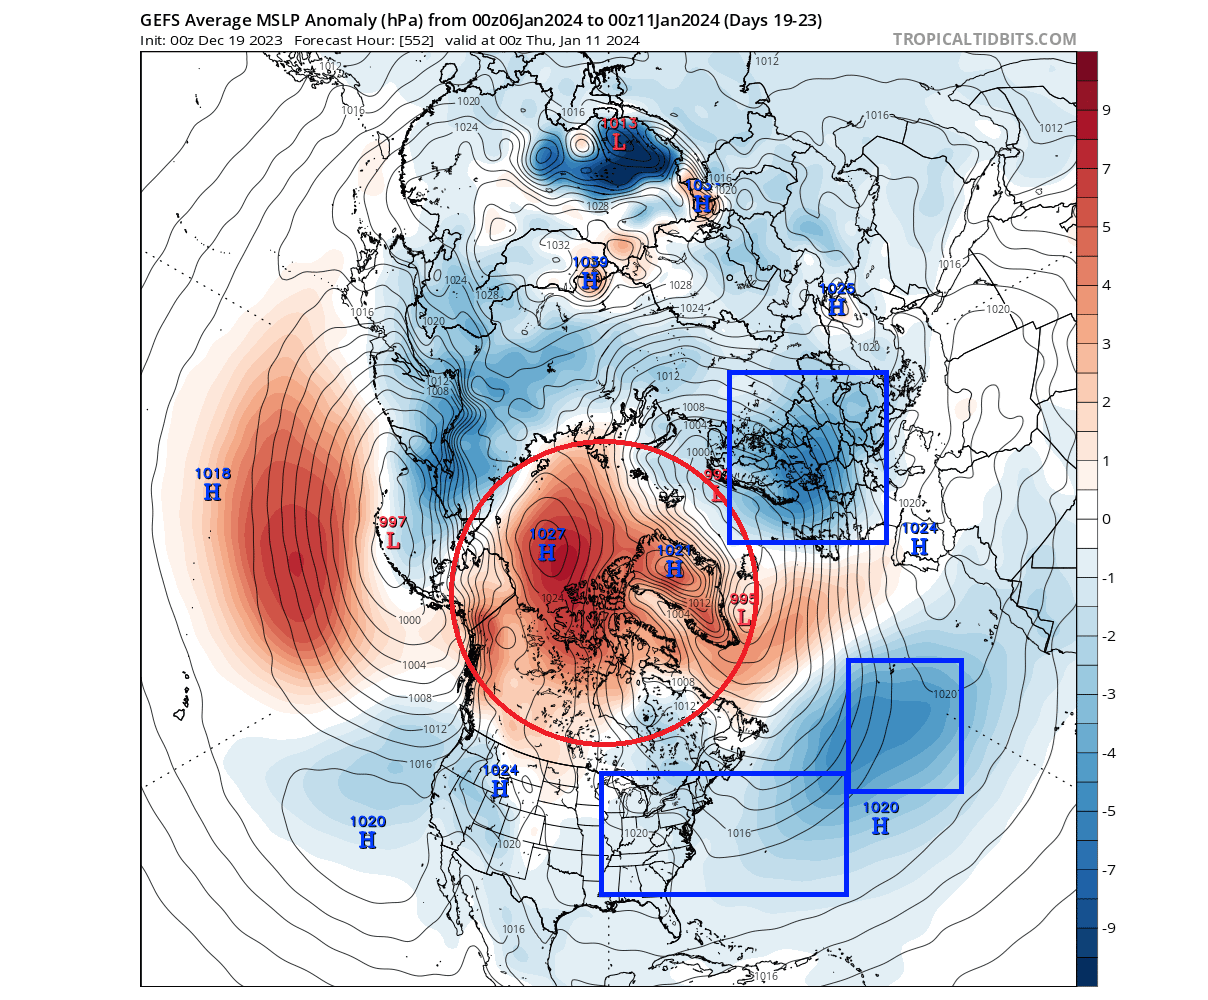 winter-forecast-january-surface-pressure-anomaly-pattern-gefs-united-states-canada-extended-early